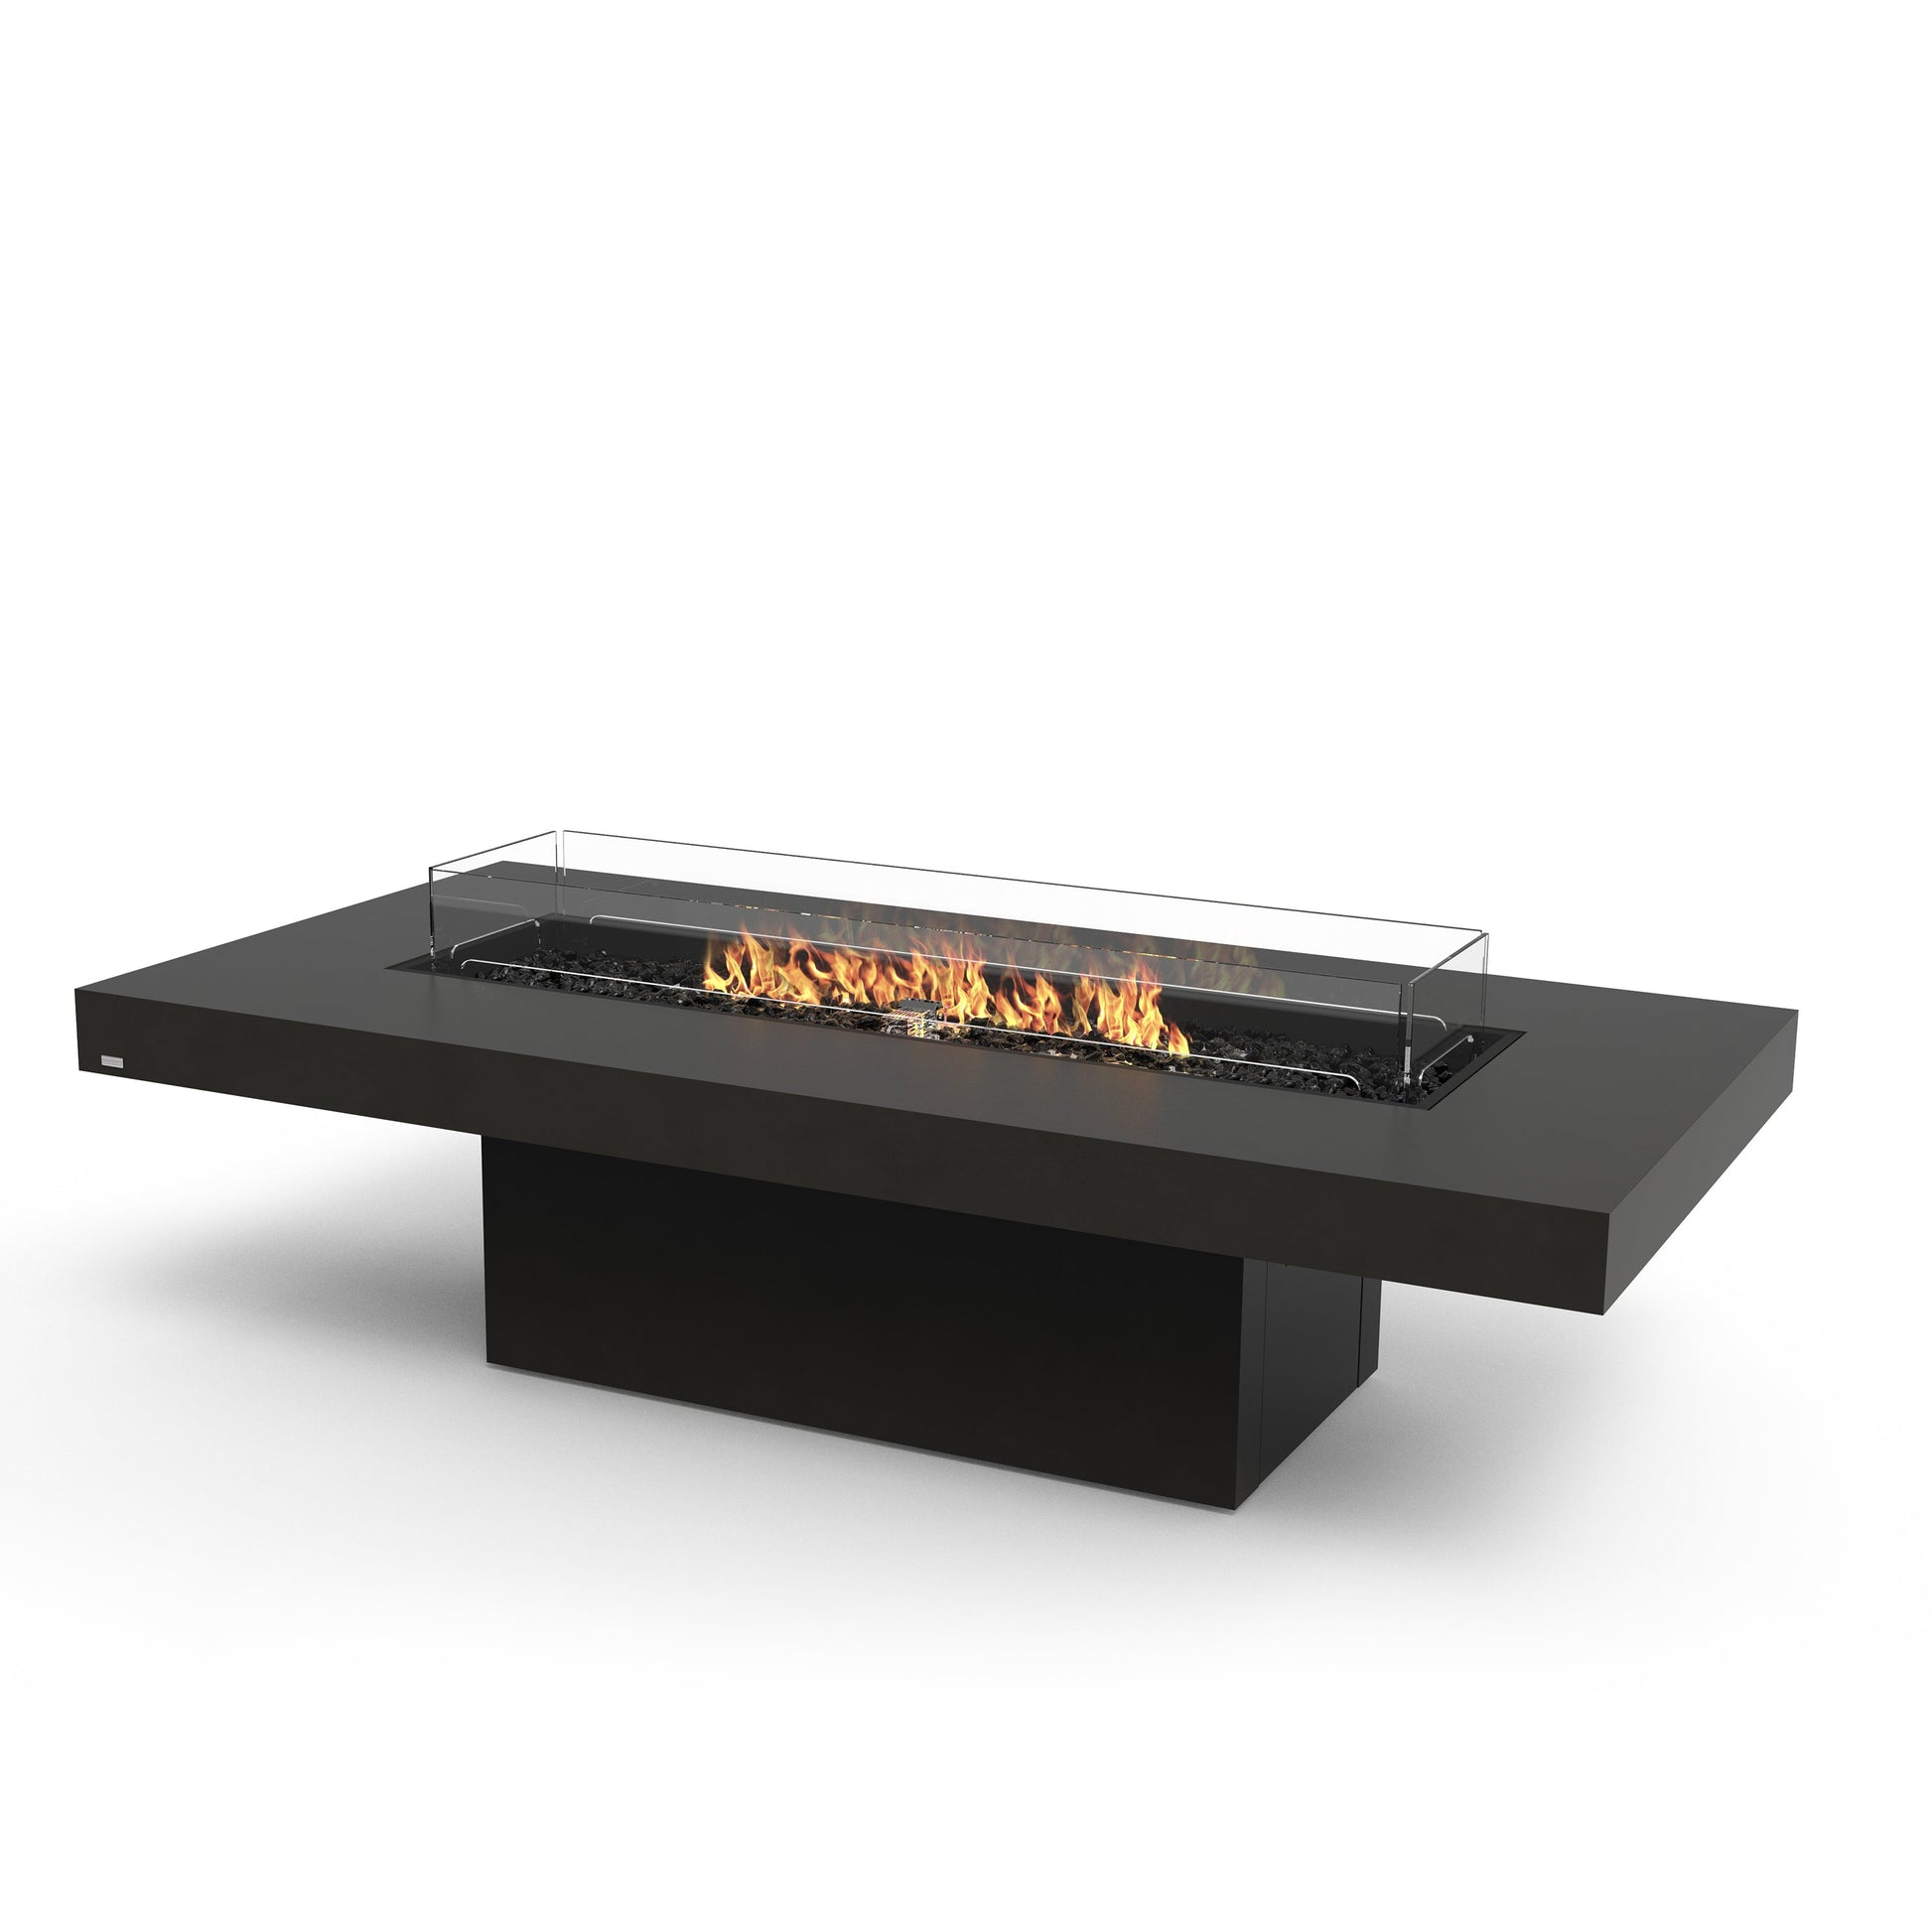 EcoSmart Fire 89" Gin 90 Chat Height Fire Pit Table with Gas LP/NG Burner by Mad Design Group